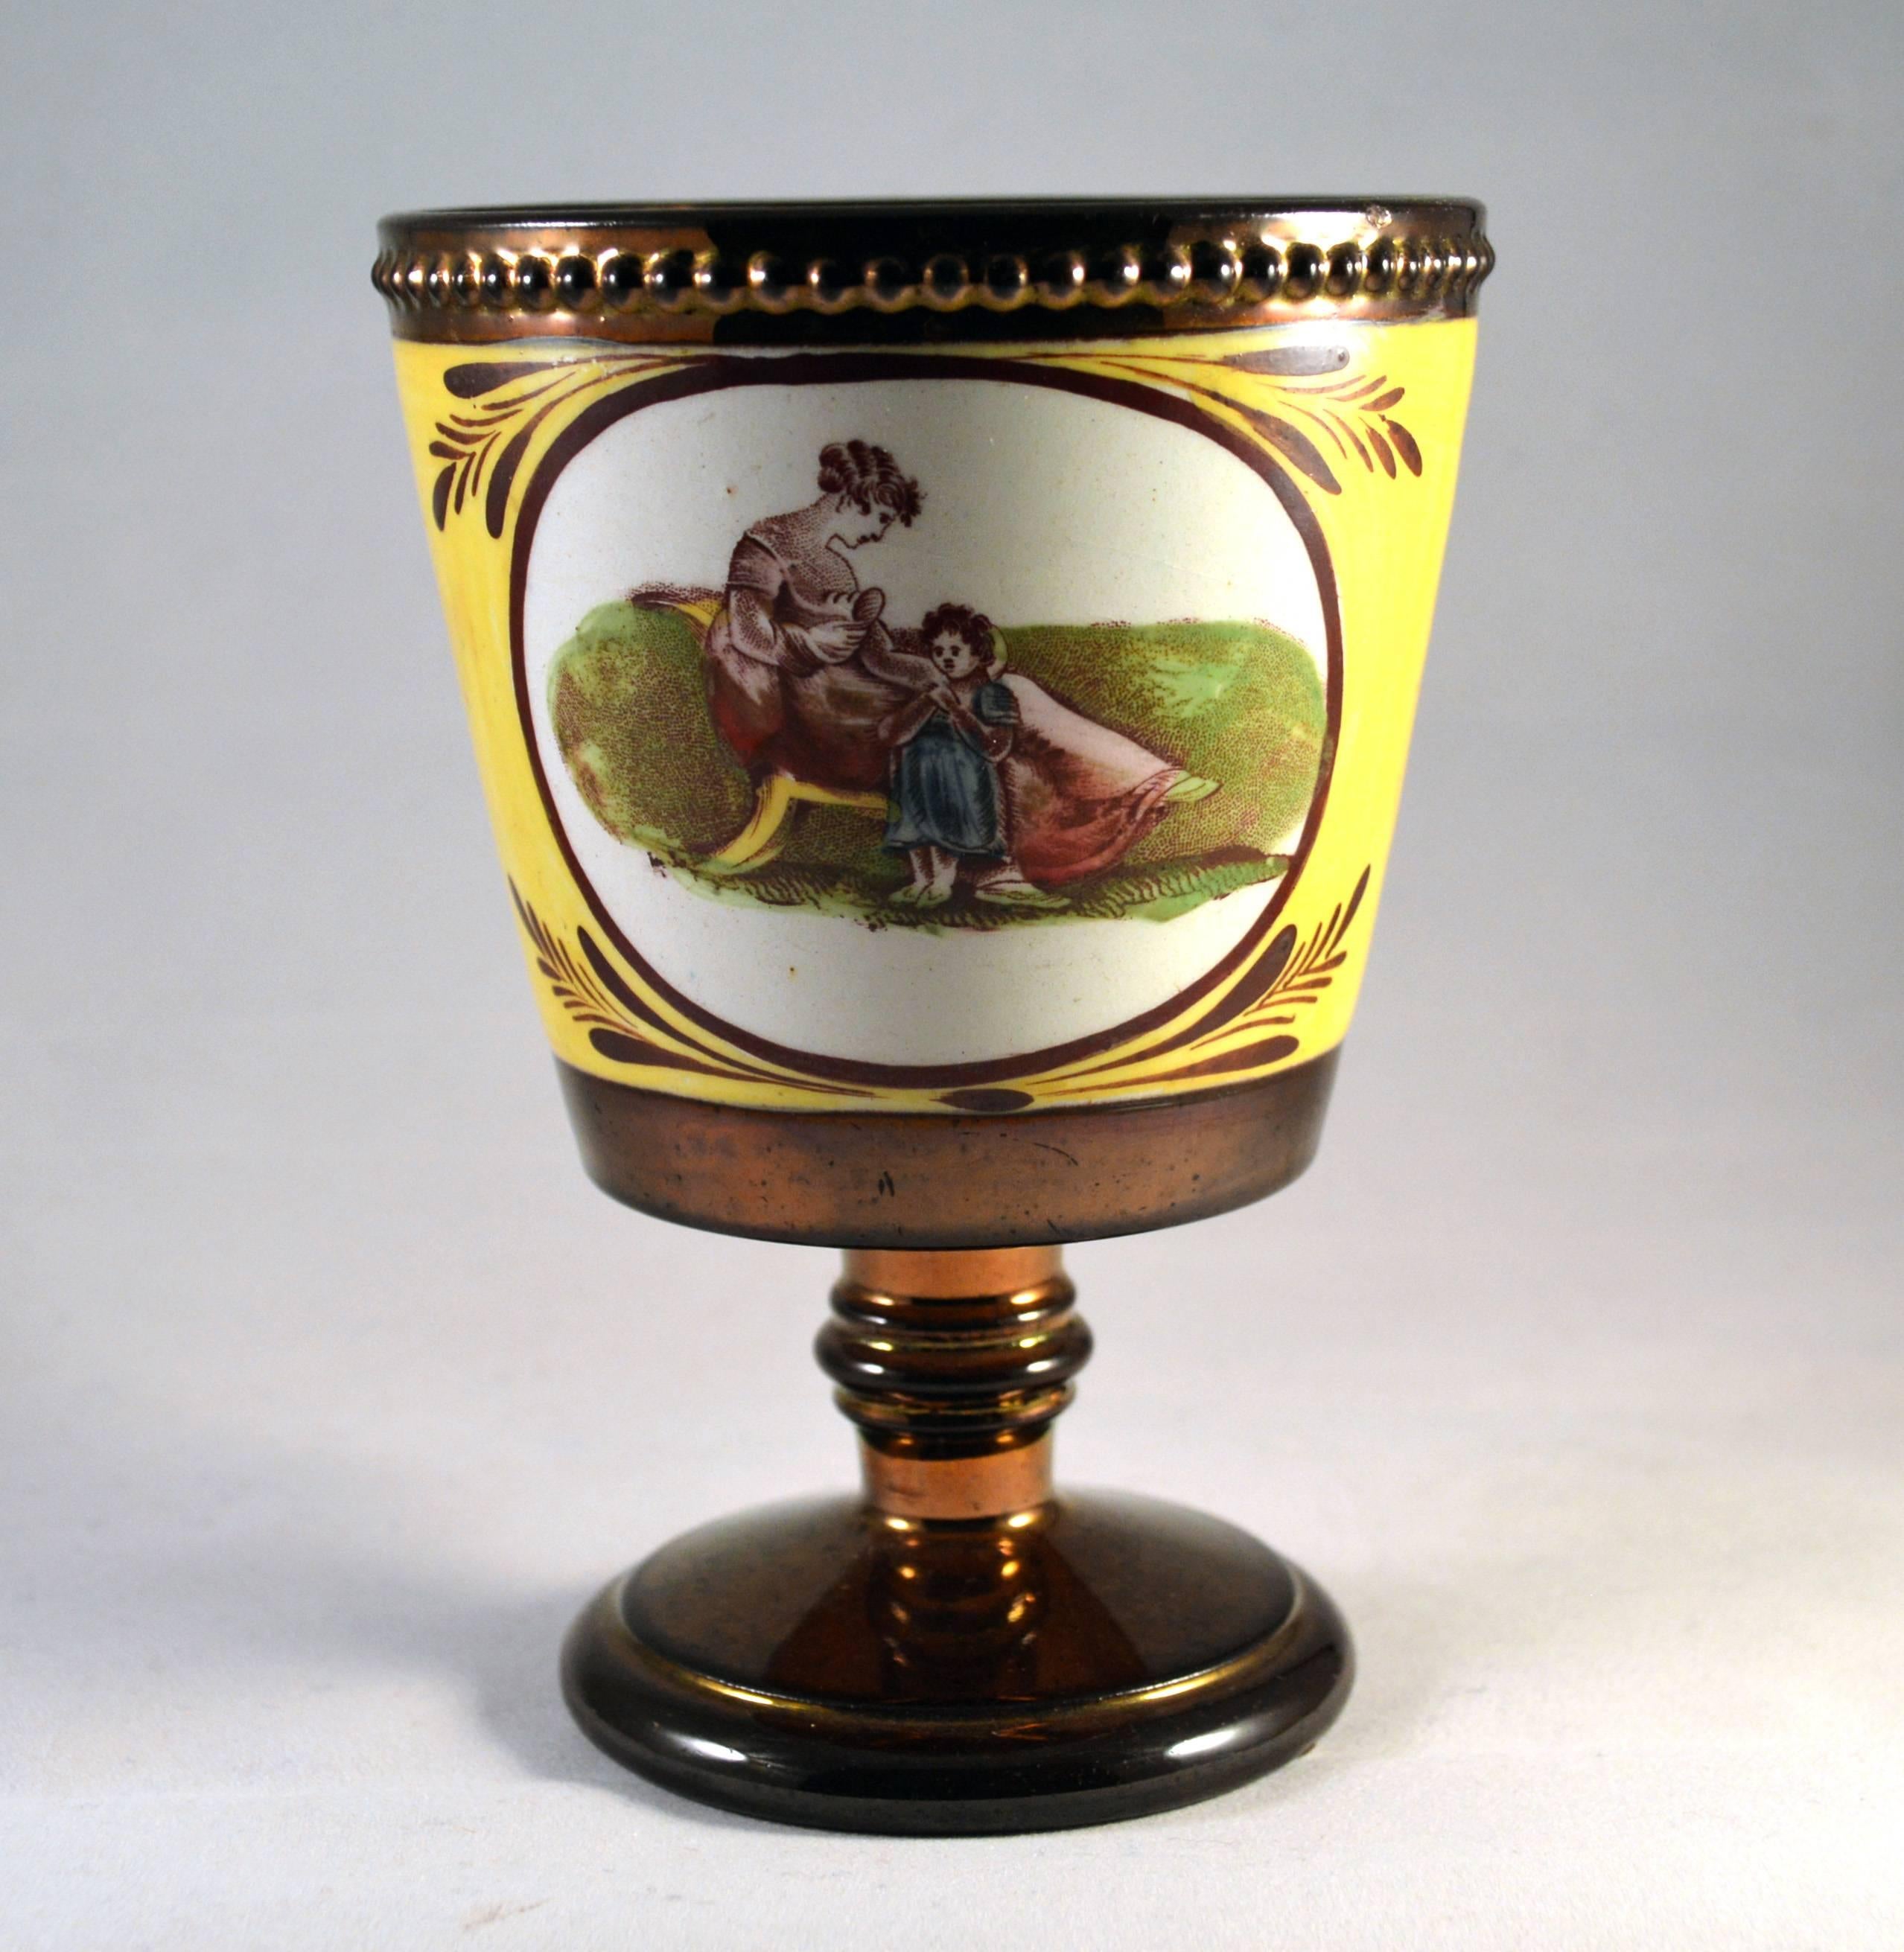 English pottery copper lustre beaker with Adam Buck figures,
Possibly enoch wood, 
circa 1810-1830.

The copper lustre (luster) beaker with a yellow ground and circular panels to front and back containing Adam Buck style prints of mothers